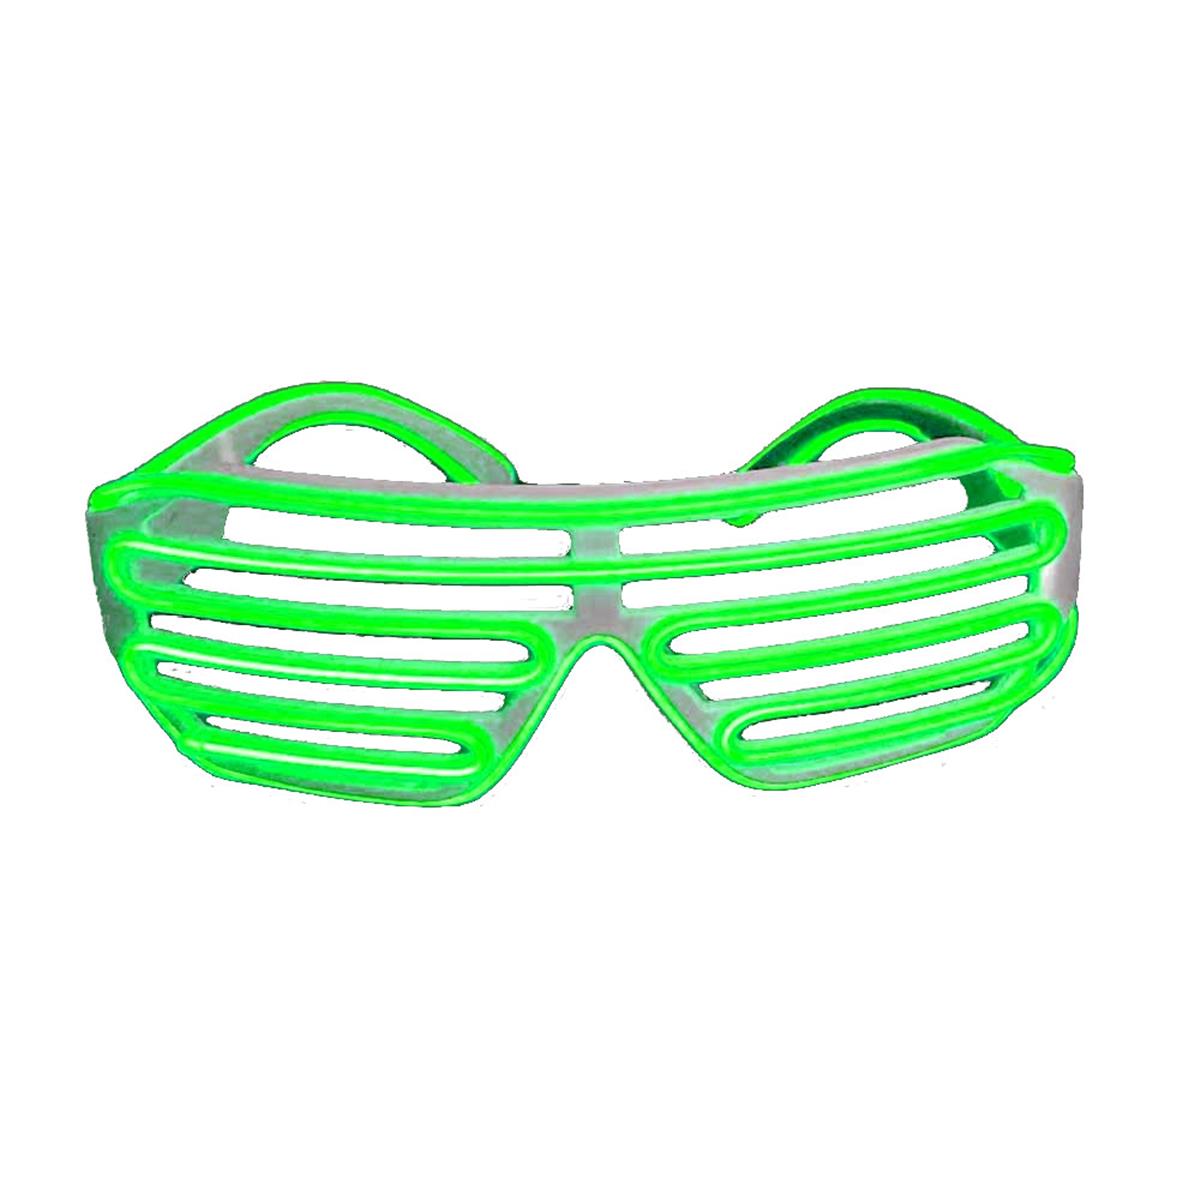 Picture of Blinkee 185185 Electro Luminescent Shutter Shades, Green